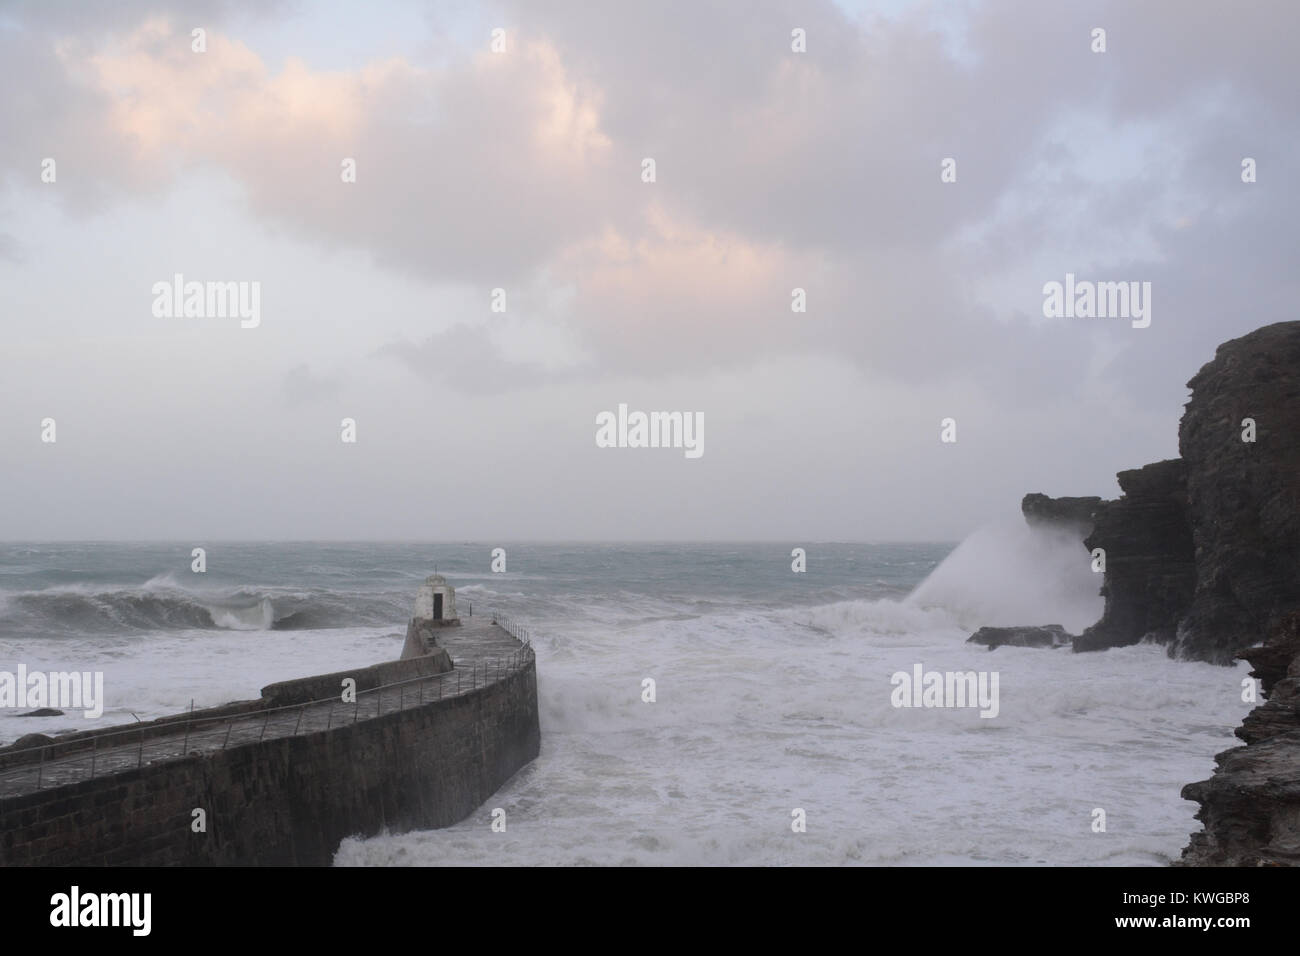 Portreath, Cornwall, UK. 3rd Jan, 2018. UK Weather. In the early hours of the morning huge swell and waves destroyed a 40ft section of the harbour wall at Portreath. The wall divides the car park - which overlooks the sea - from a small beach and the local pub. Police cordoned off the car park. Credit: Simon Maycock/Alamy Live News Stock Photo